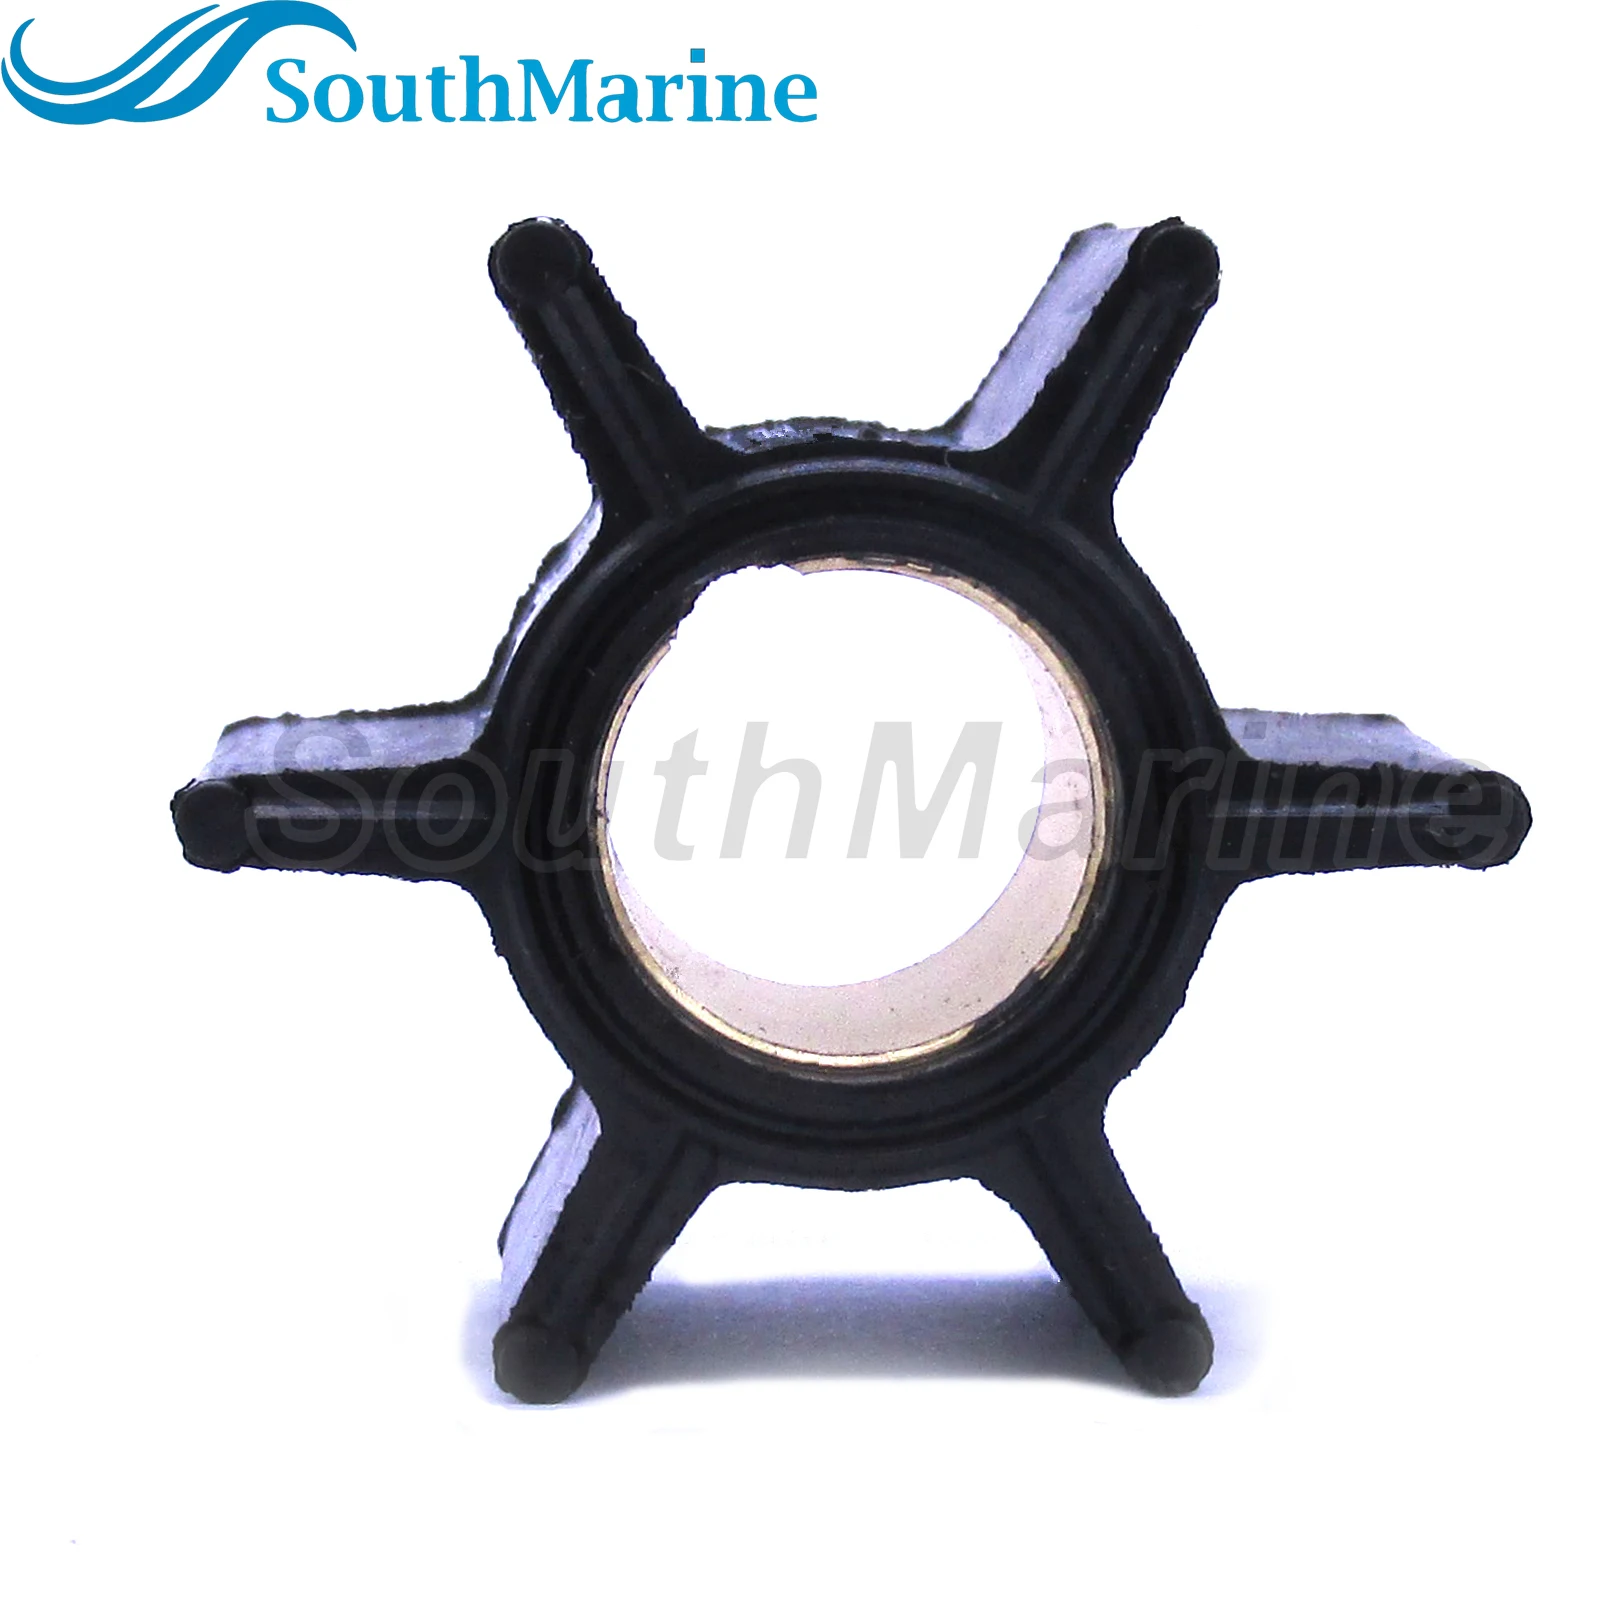 Mercury Mariner Impeller Kit 47-89981Q1 3.9 4 4.5 6 7.5 8 9.8 HP 1975-1986 with .456 O.D Shaft SEI MARINE PRODUCTS 